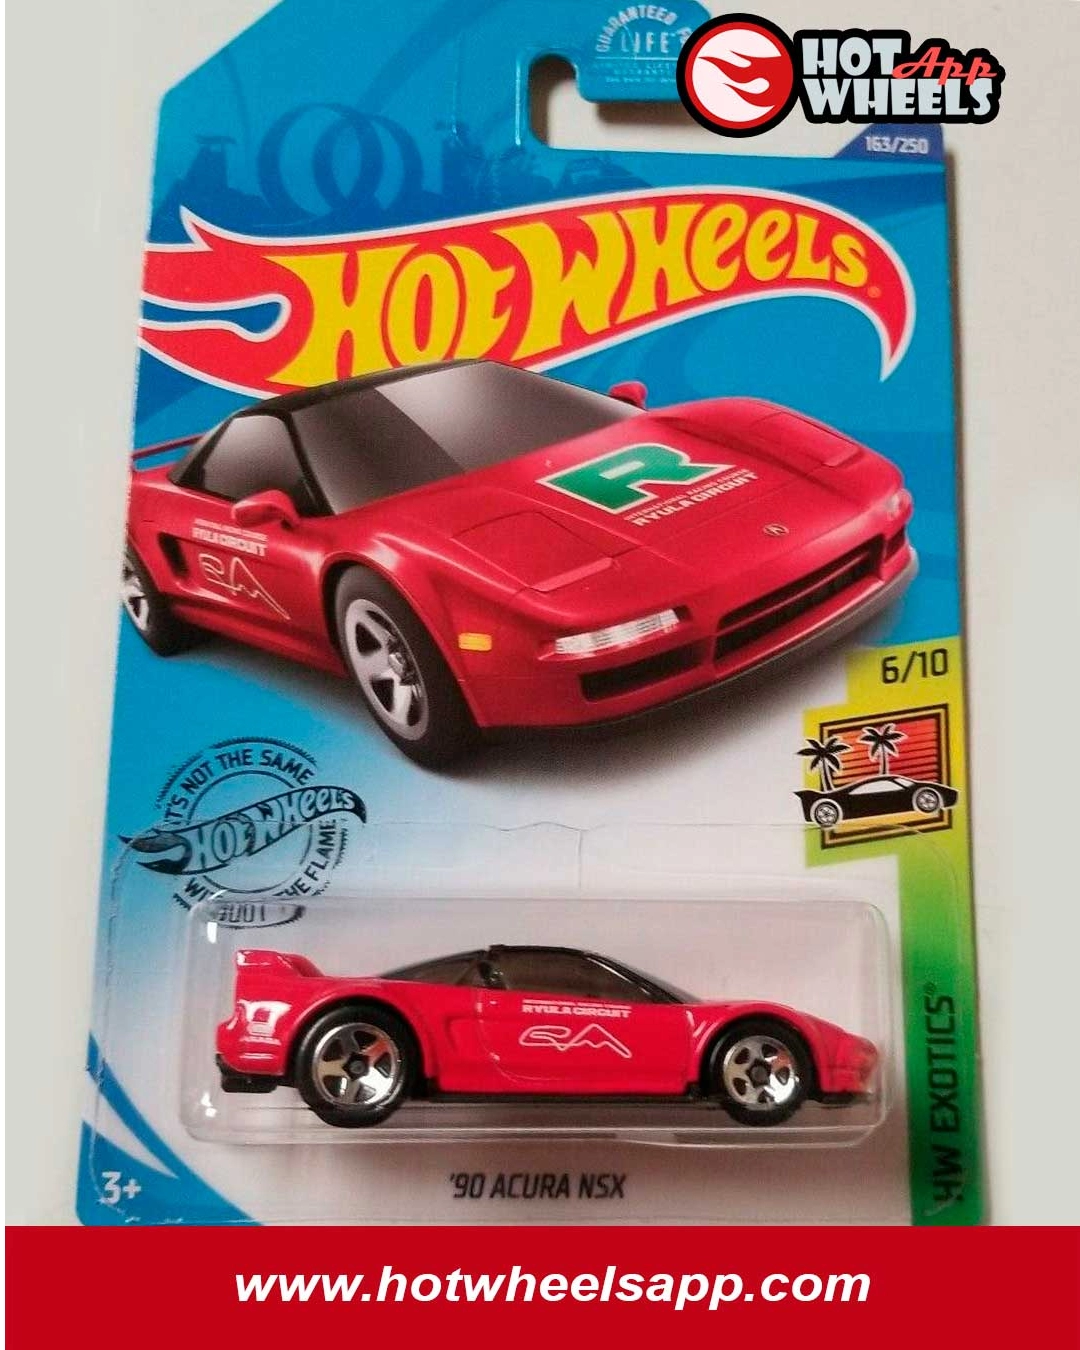 Hot Wheels '90 Acura NSX HW Exotics #6/10 Red Die-Cast 1:64 Scale Must See New